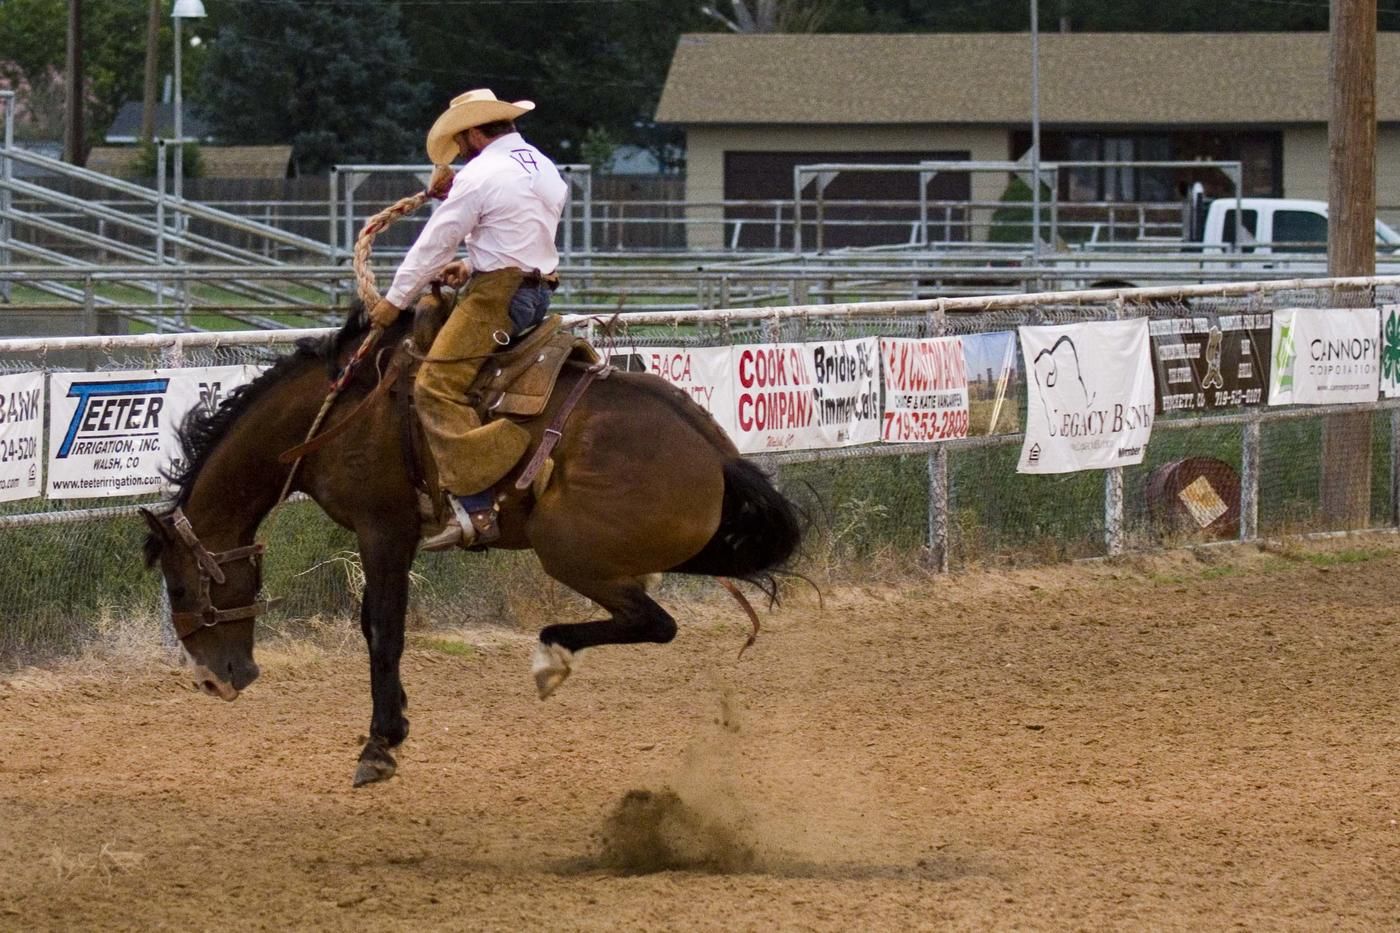 pro rodeo cowboy on horse jumping back feet up